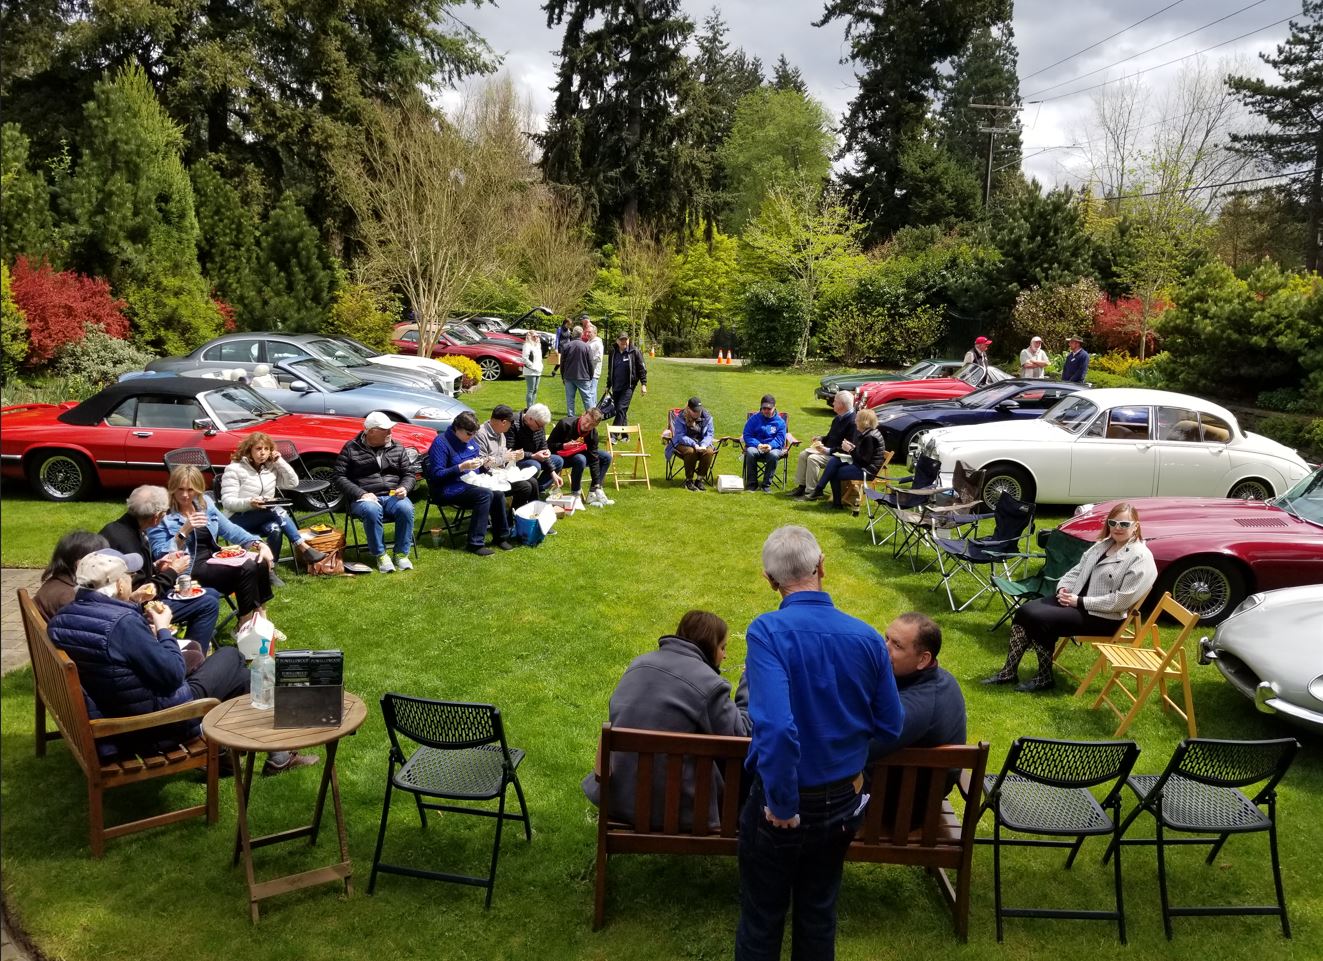 The drive ended at PowellsWood Garden in Federal Way.  It was a great place to have a picnic lunch and socialize with our friends and admire the cars!